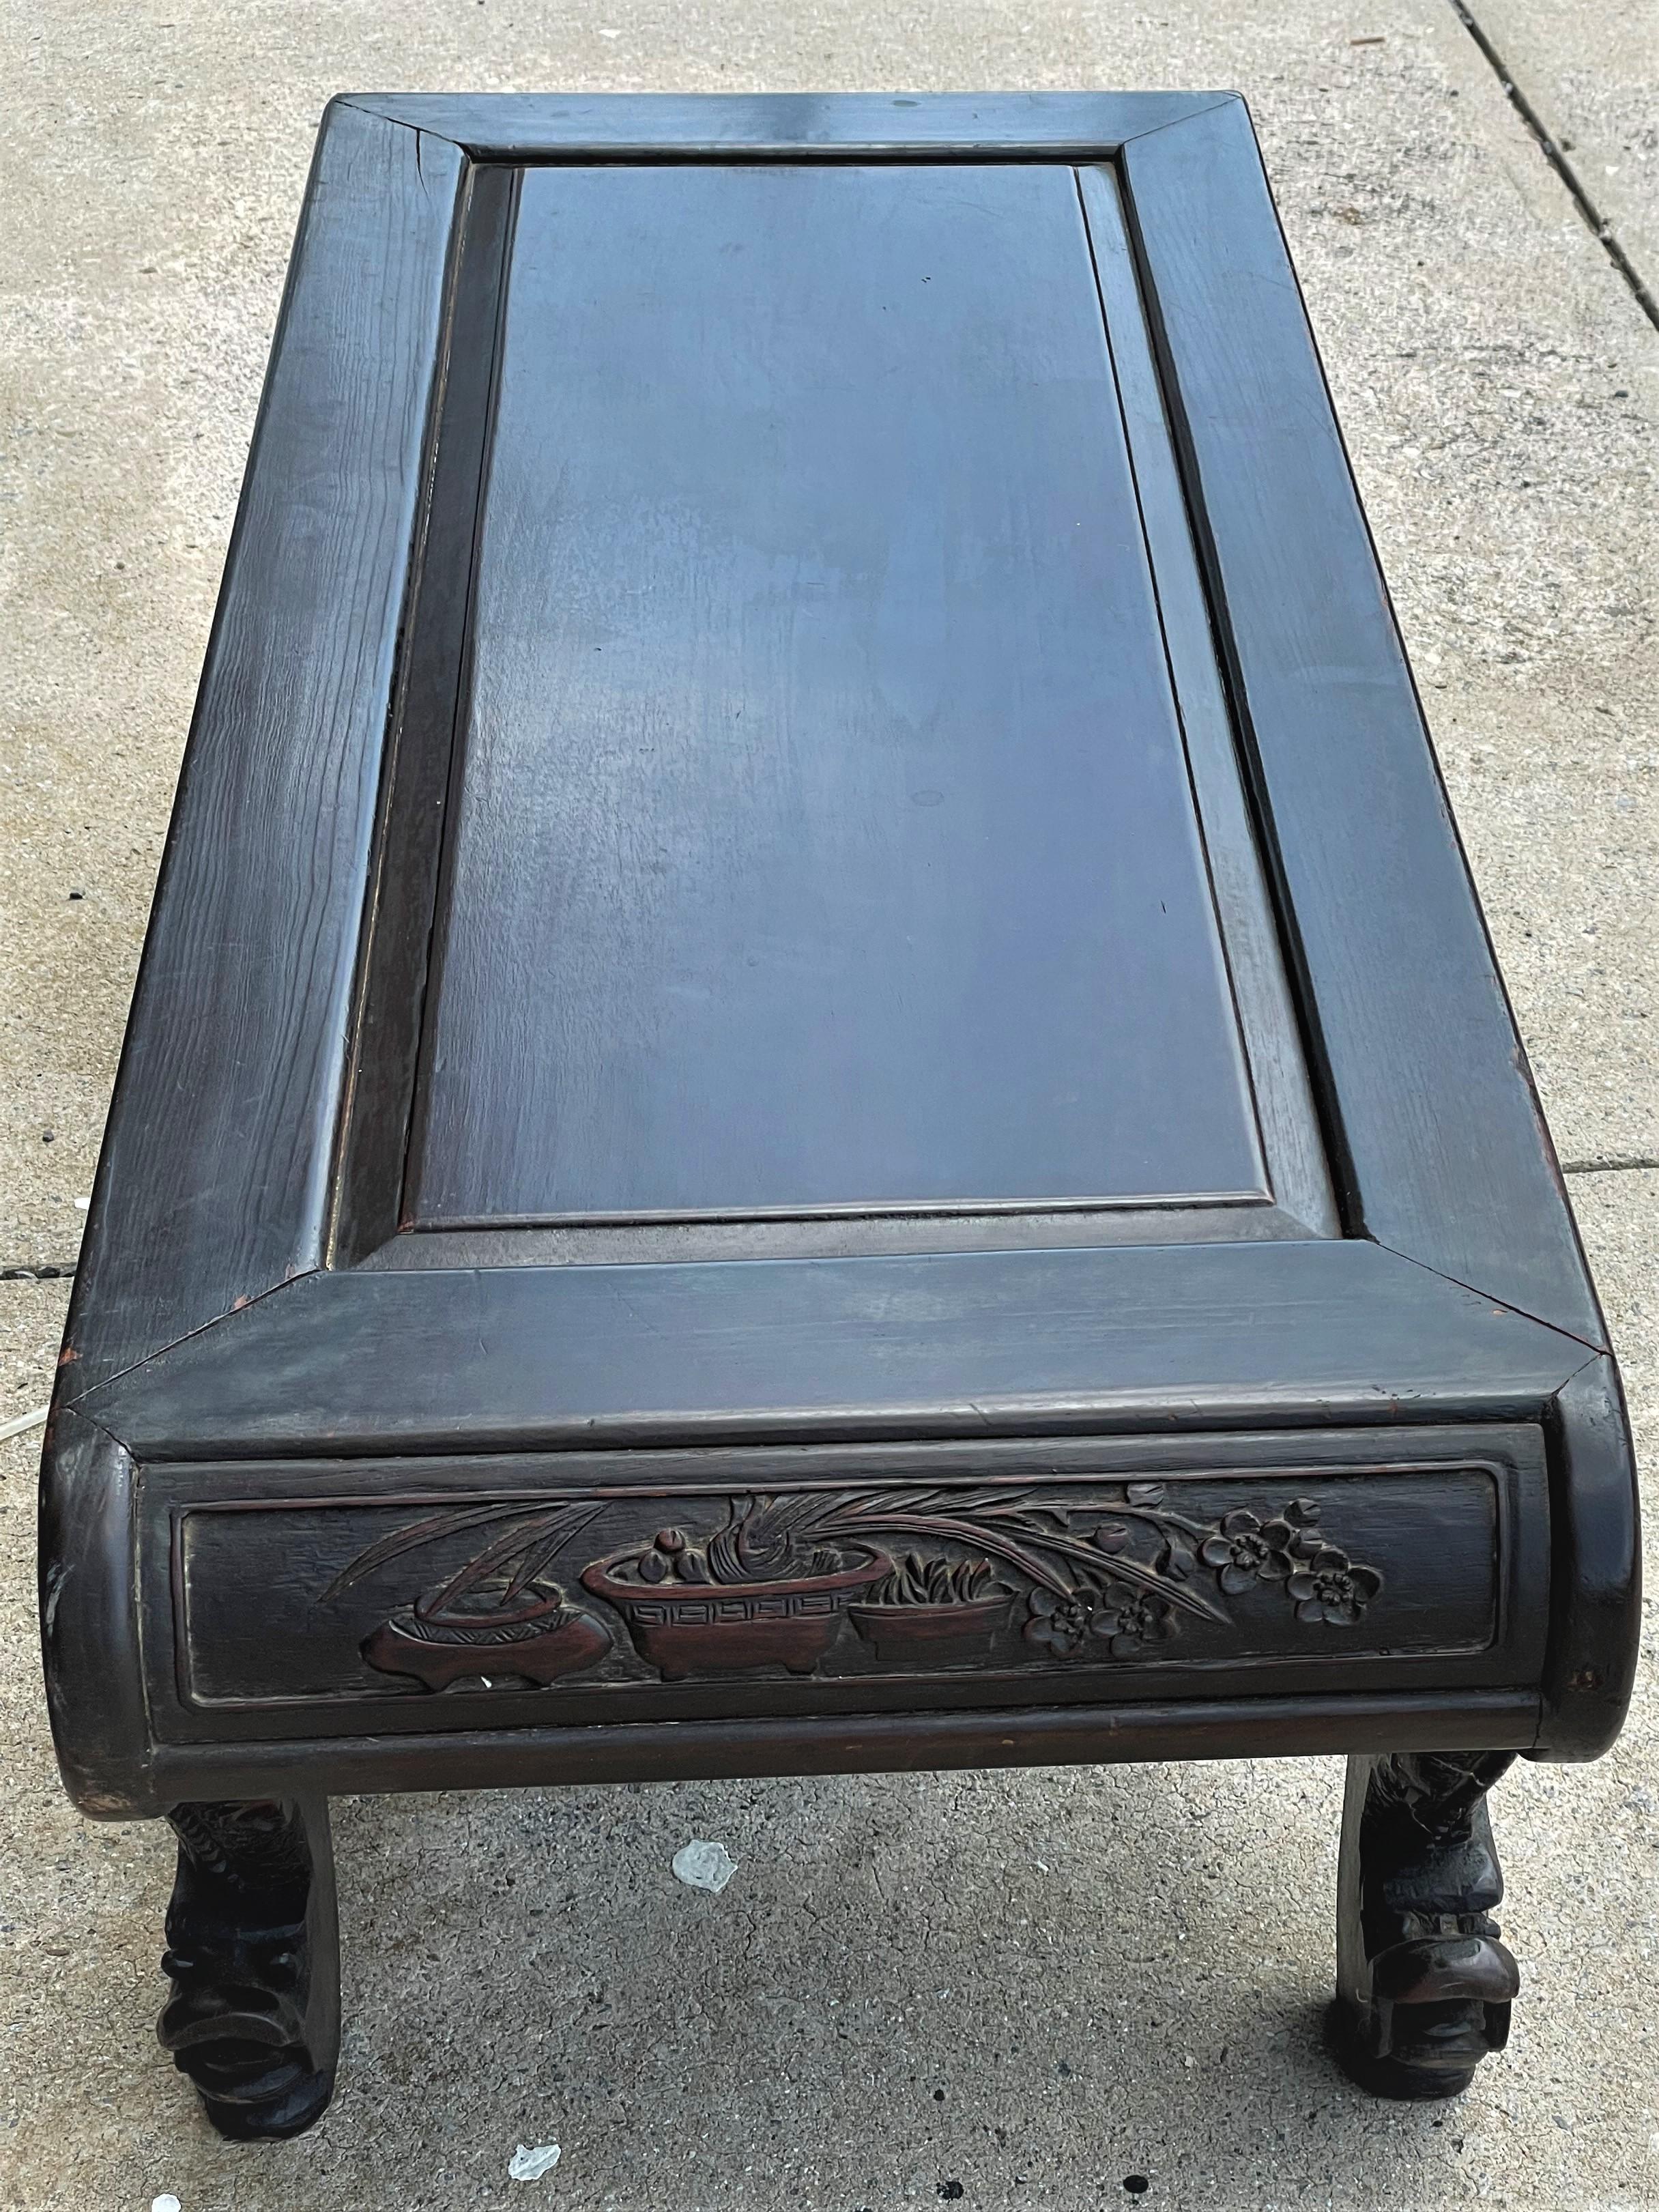 This is a wonderful, finely carved Kang low table or bench, which originally would have even been used as a bed. It has exotic dragon carved legs with the dragon head being the feet. The scrolled ends are carved in relief on the outside but have